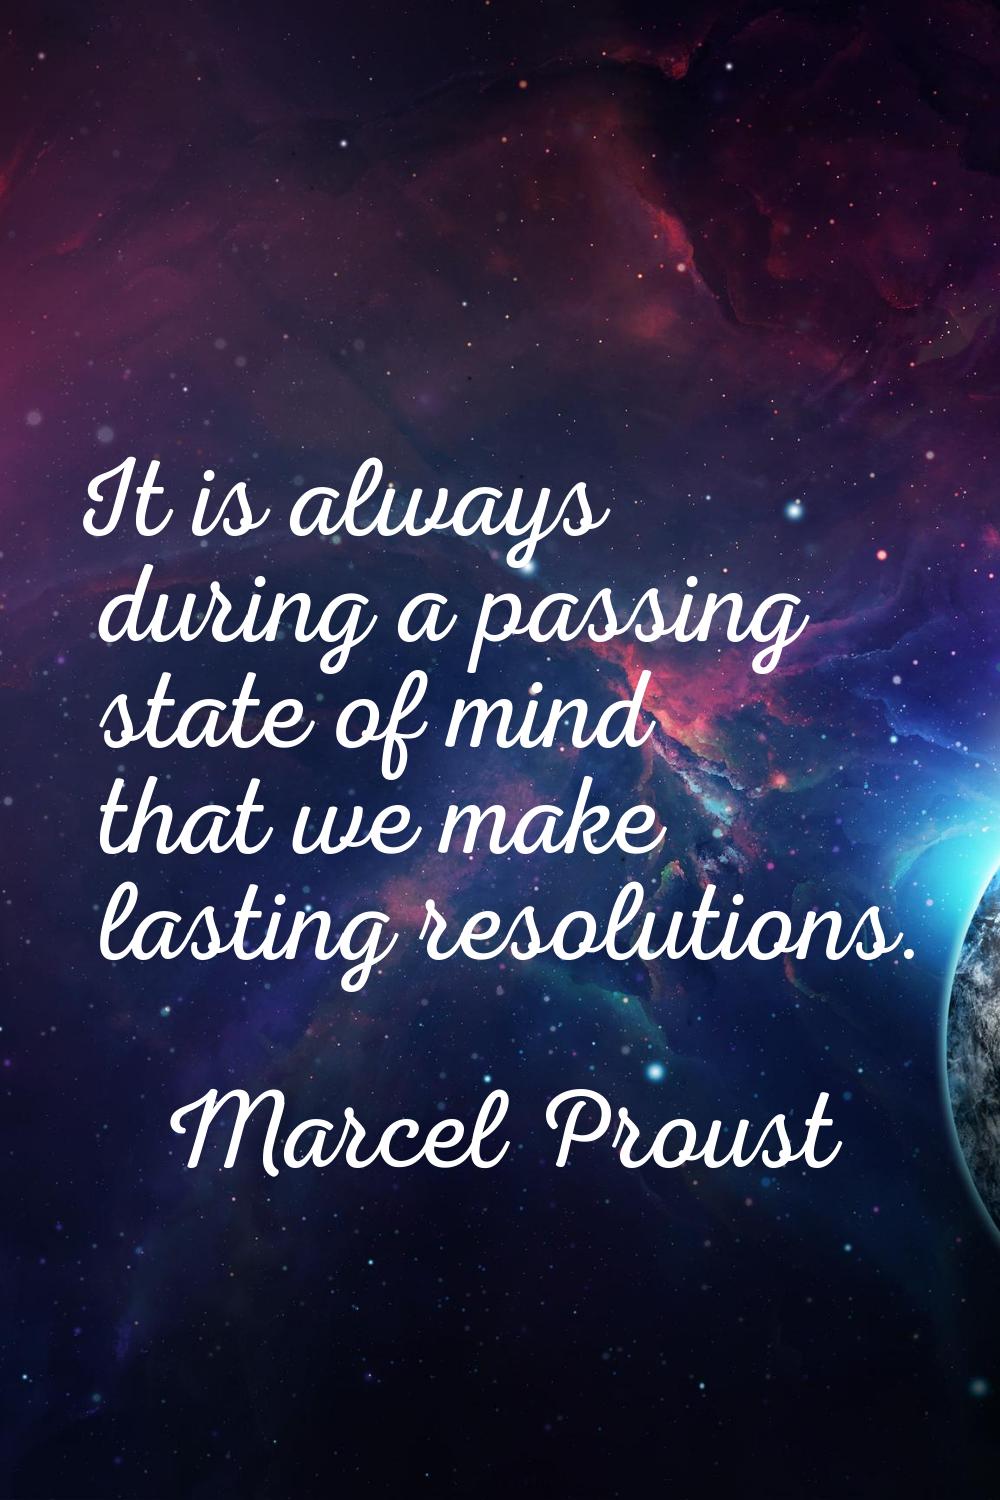 It is always during a passing state of mind that we make lasting resolutions.